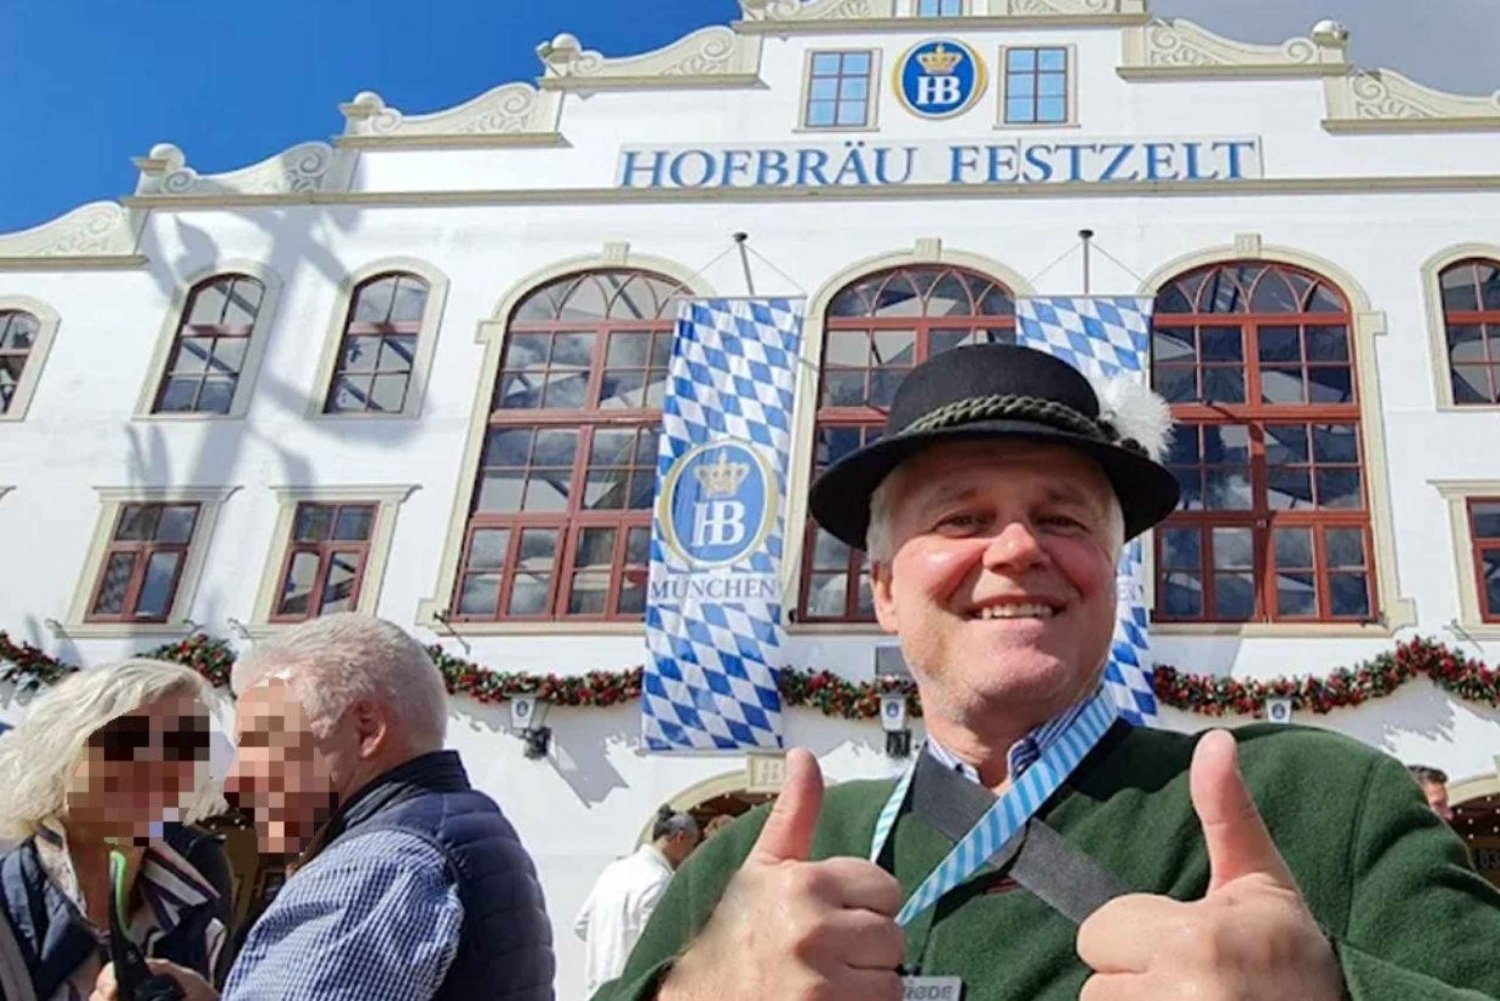 VirtualTour Video October Beer Festival Munich with Wolfgang